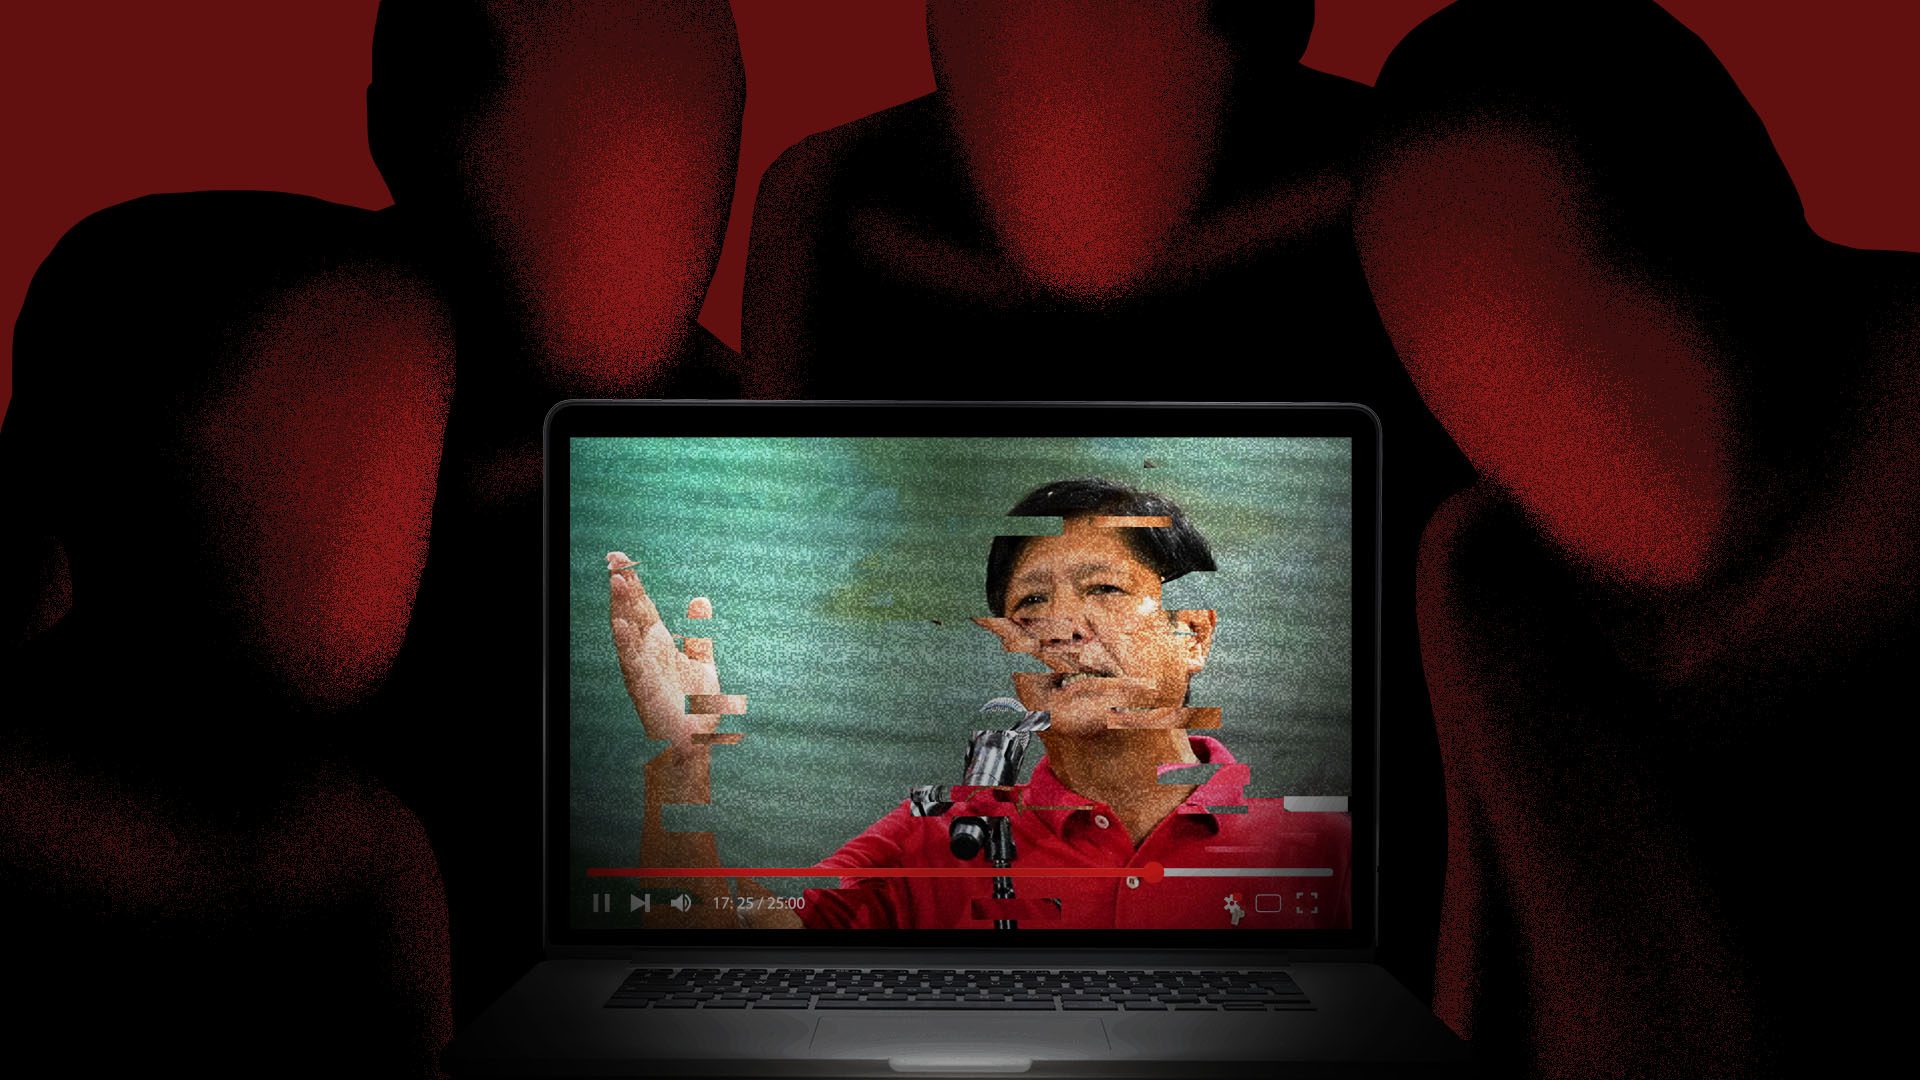 YouTube videos on Marcos Jr. designed to win him the election – study